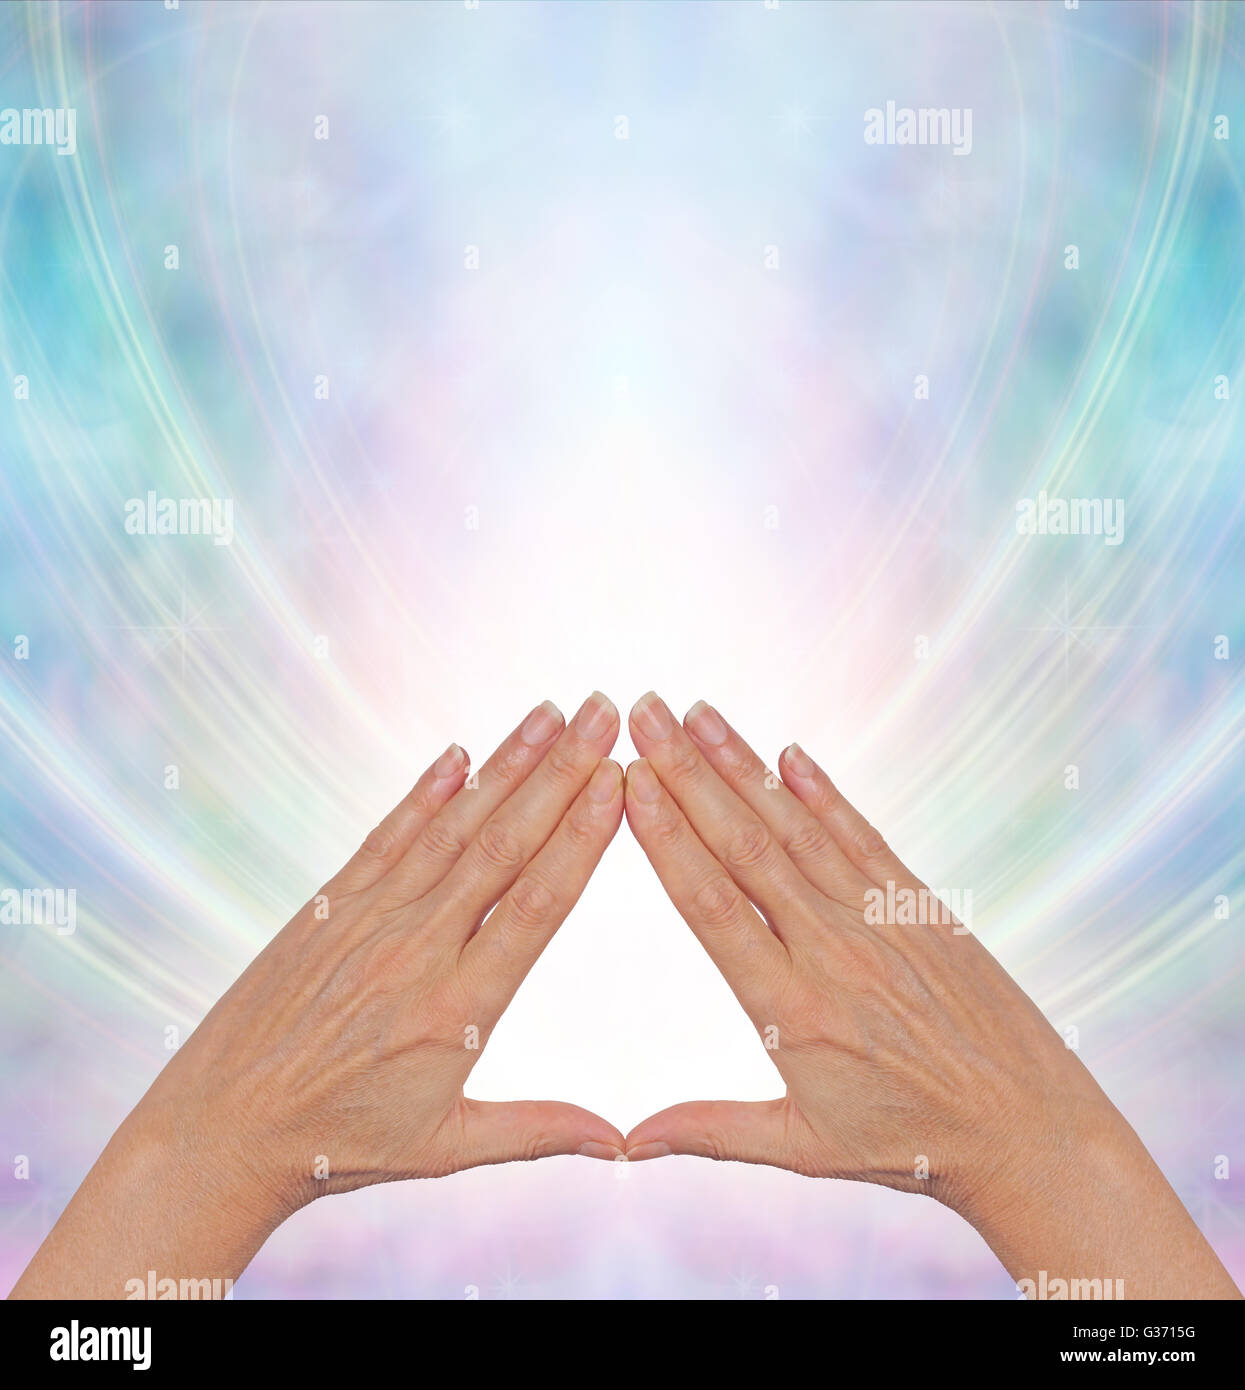 Pyramid healing practitioner with hands in triangle shape wind a shaft of light behind on a pale blue and pink background Stock Photo